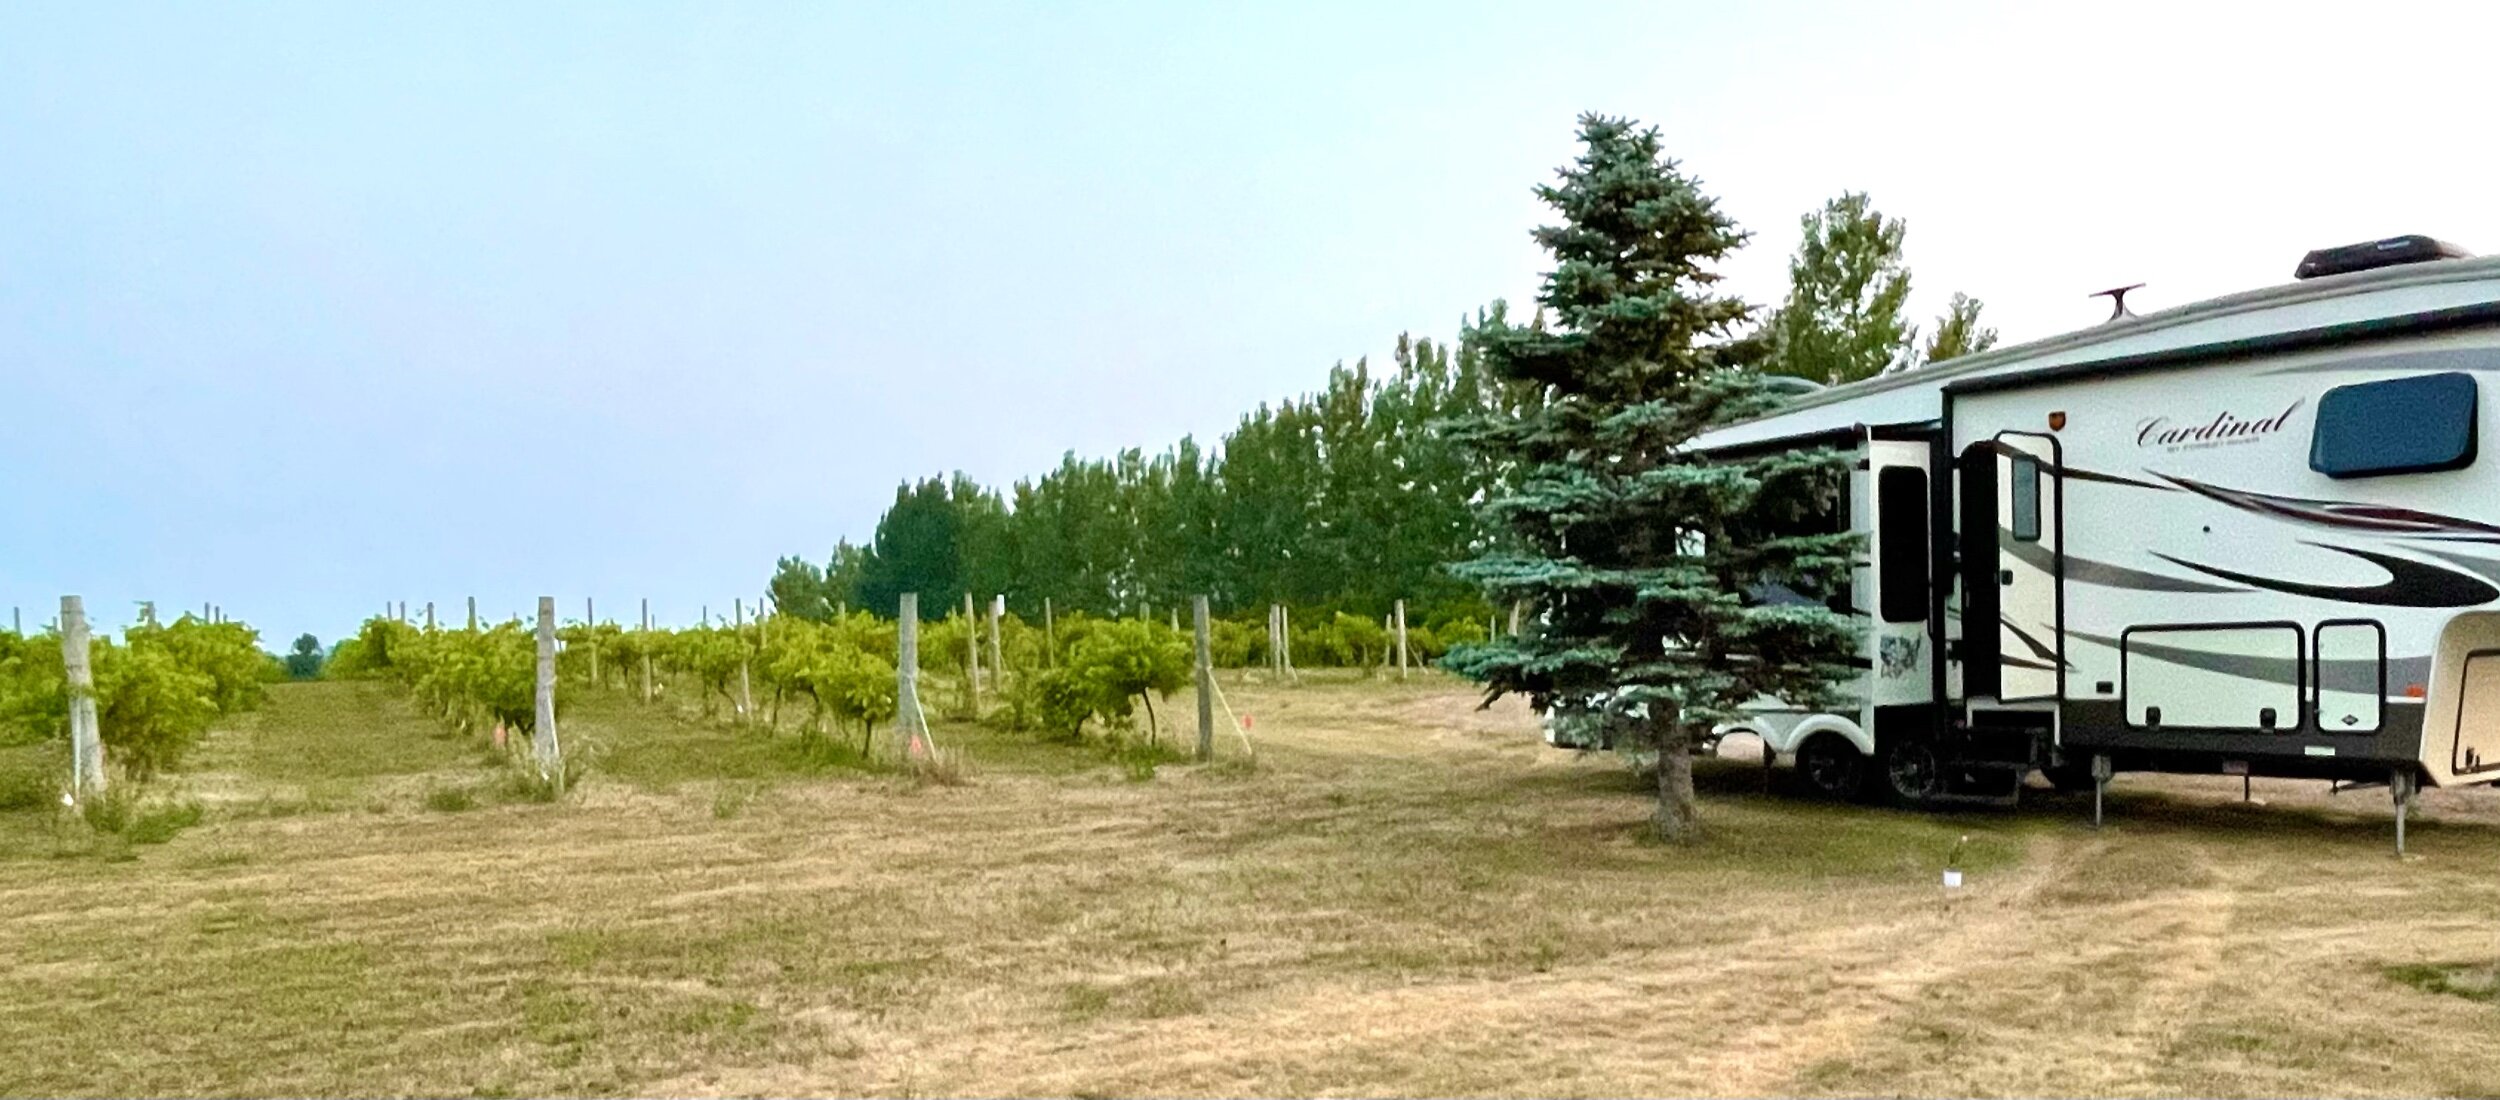  In Buffalo, North Dakota we camped one night at a Harvest Host location,  Red Trails Vineyard . The owner, Rodney, was absolutely the best host. We enjoyed wine tasting at this lovely vineyard and then the three of us went to dinner at the only rest